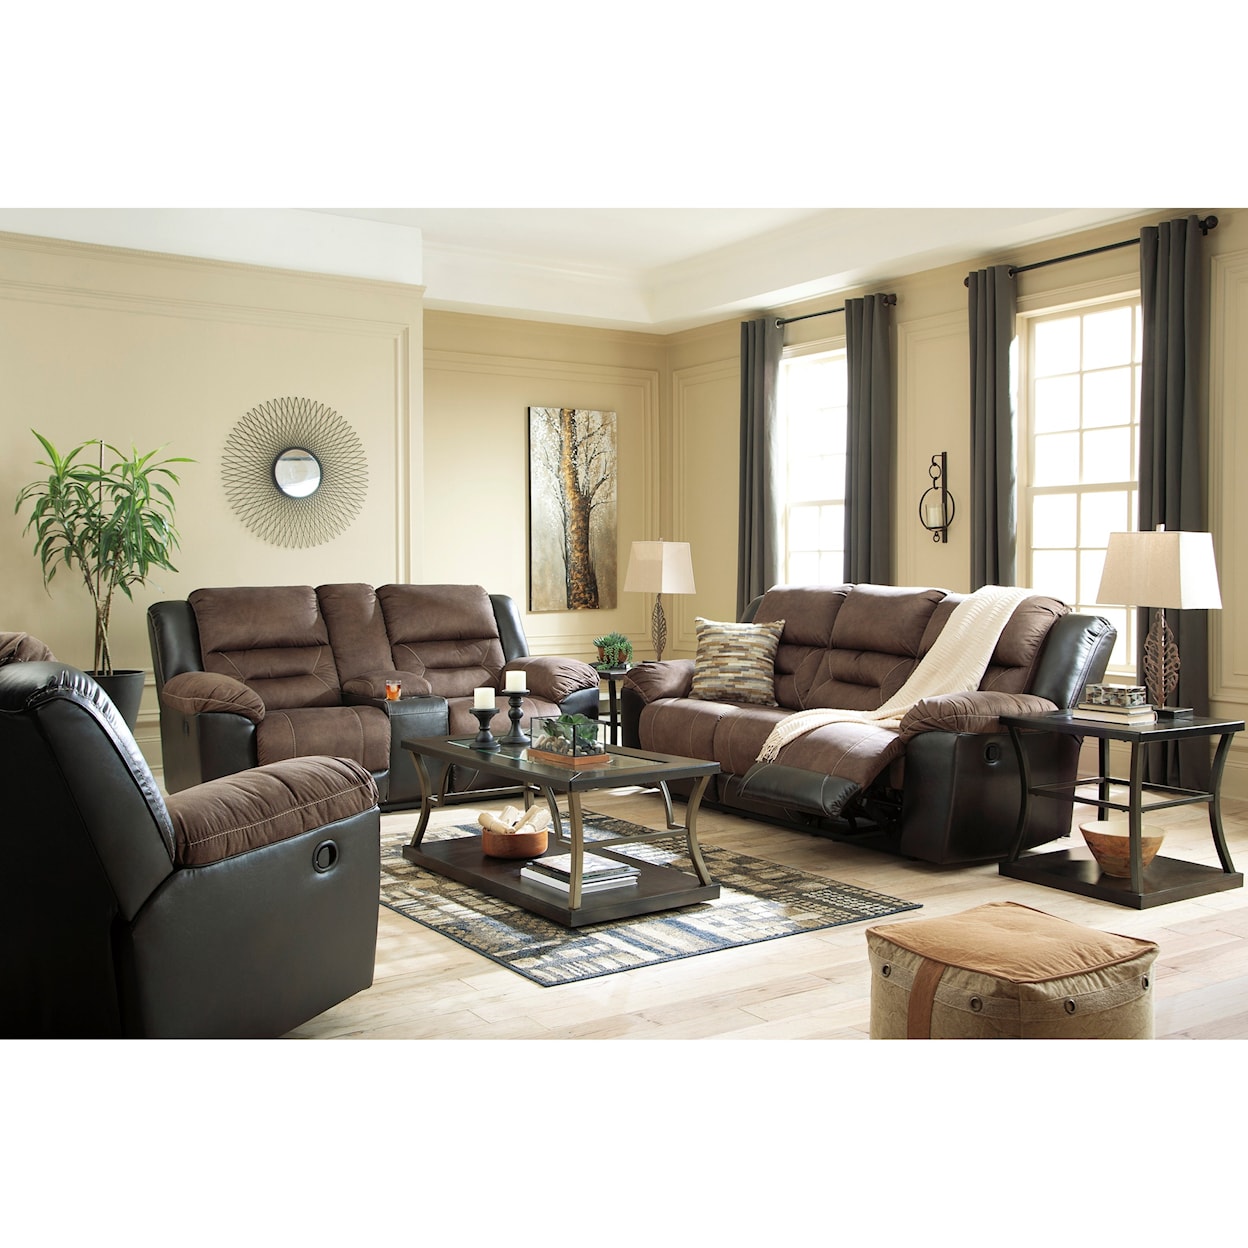 Signature Design By Ashley Earhart 2910188 Casual Reclining Sofa With